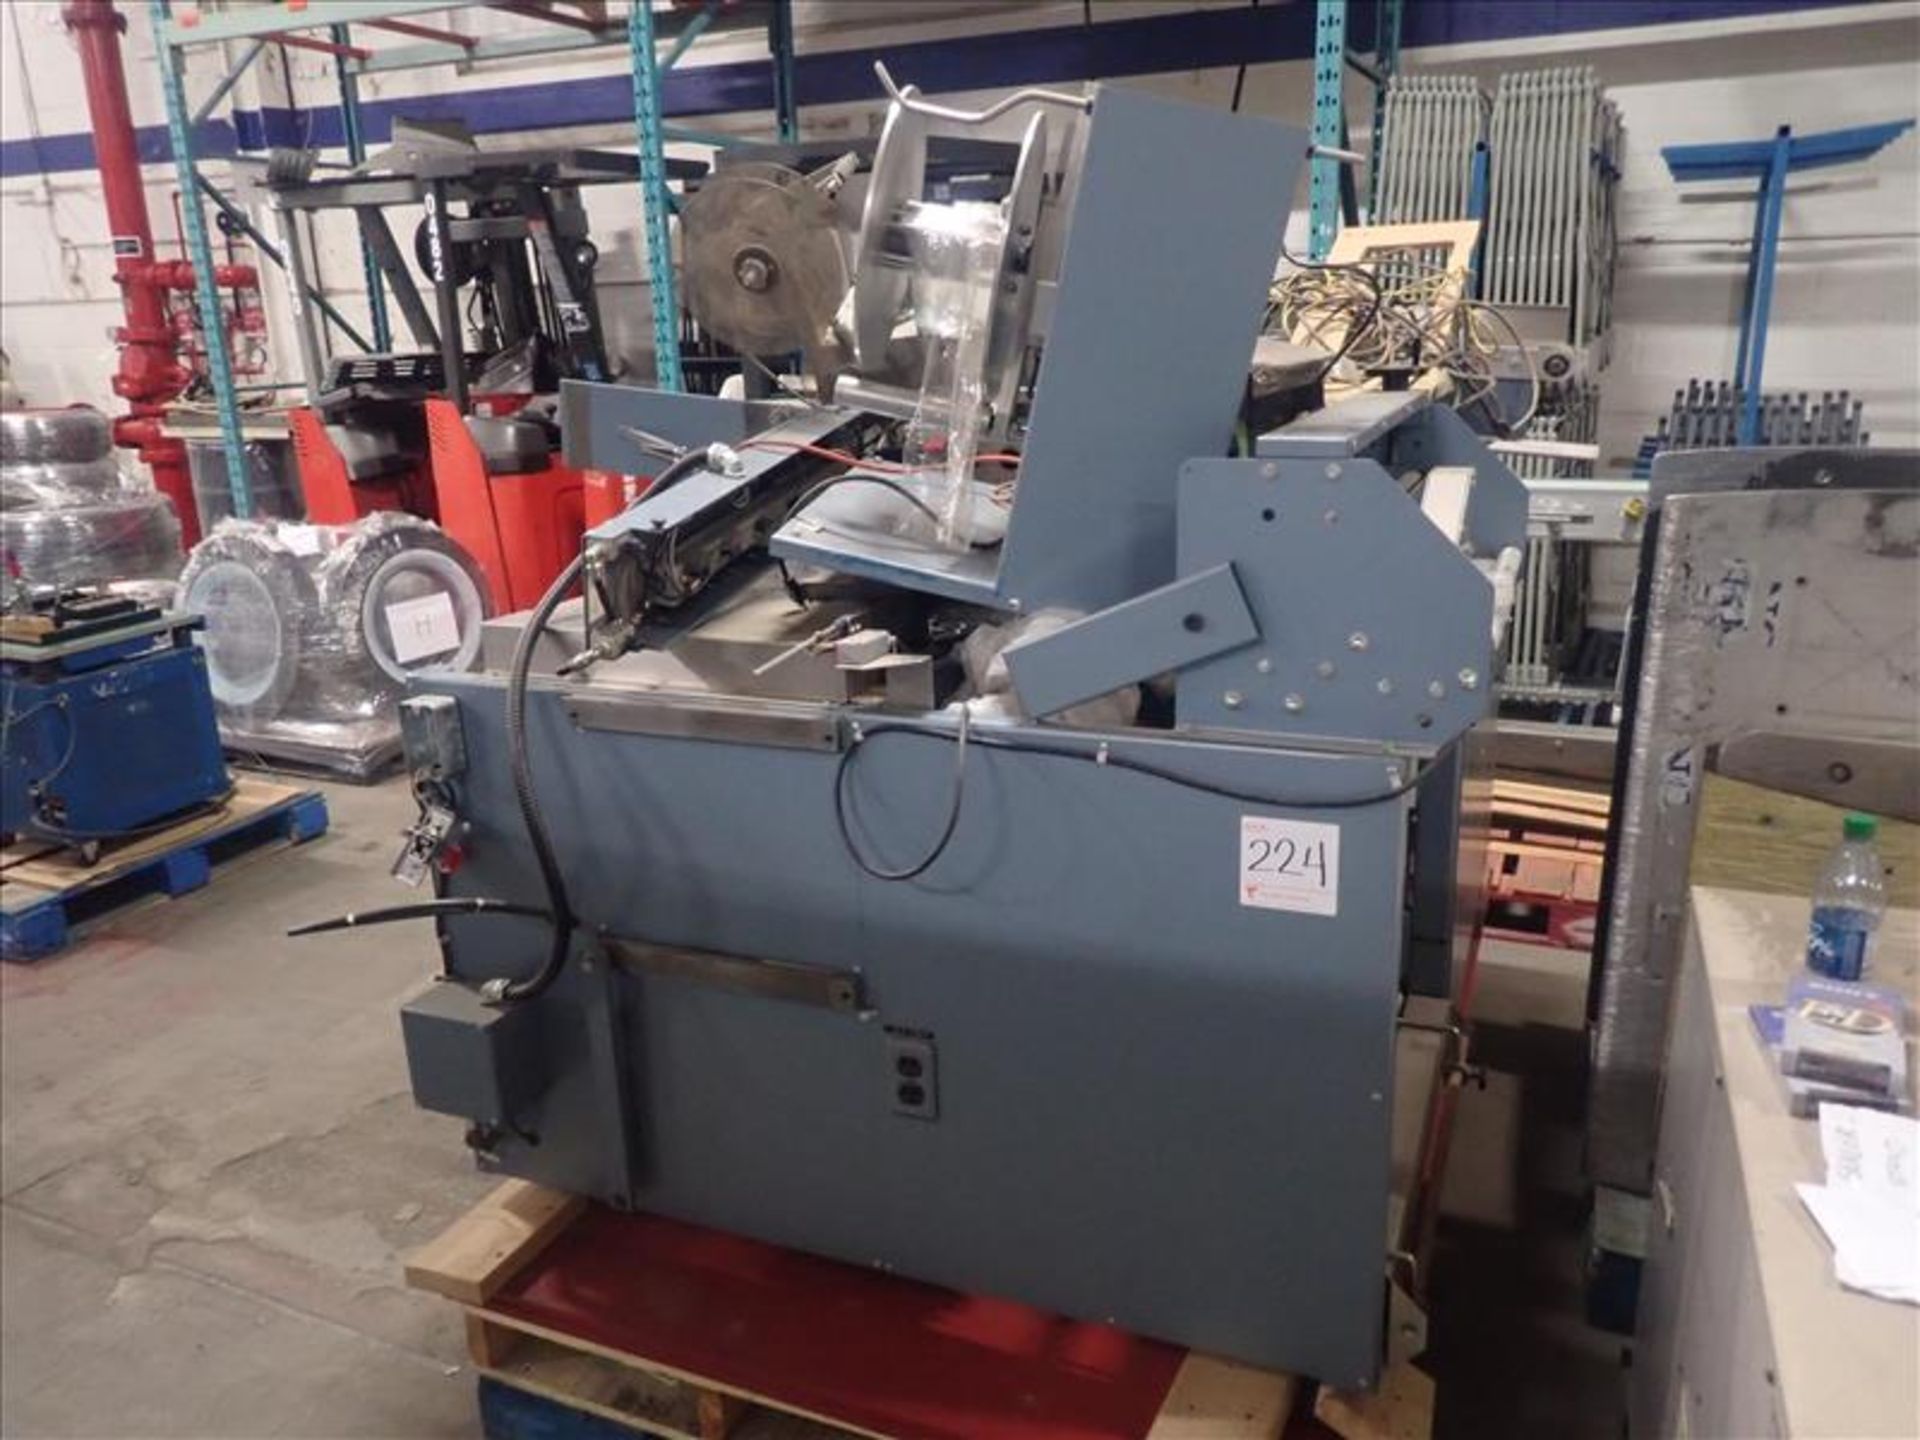 RBS automatic sealing machine, mod. RALS, ser. no. 38-0073, size 20 x 24 w/ rewinder and Label-All - Image 6 of 11